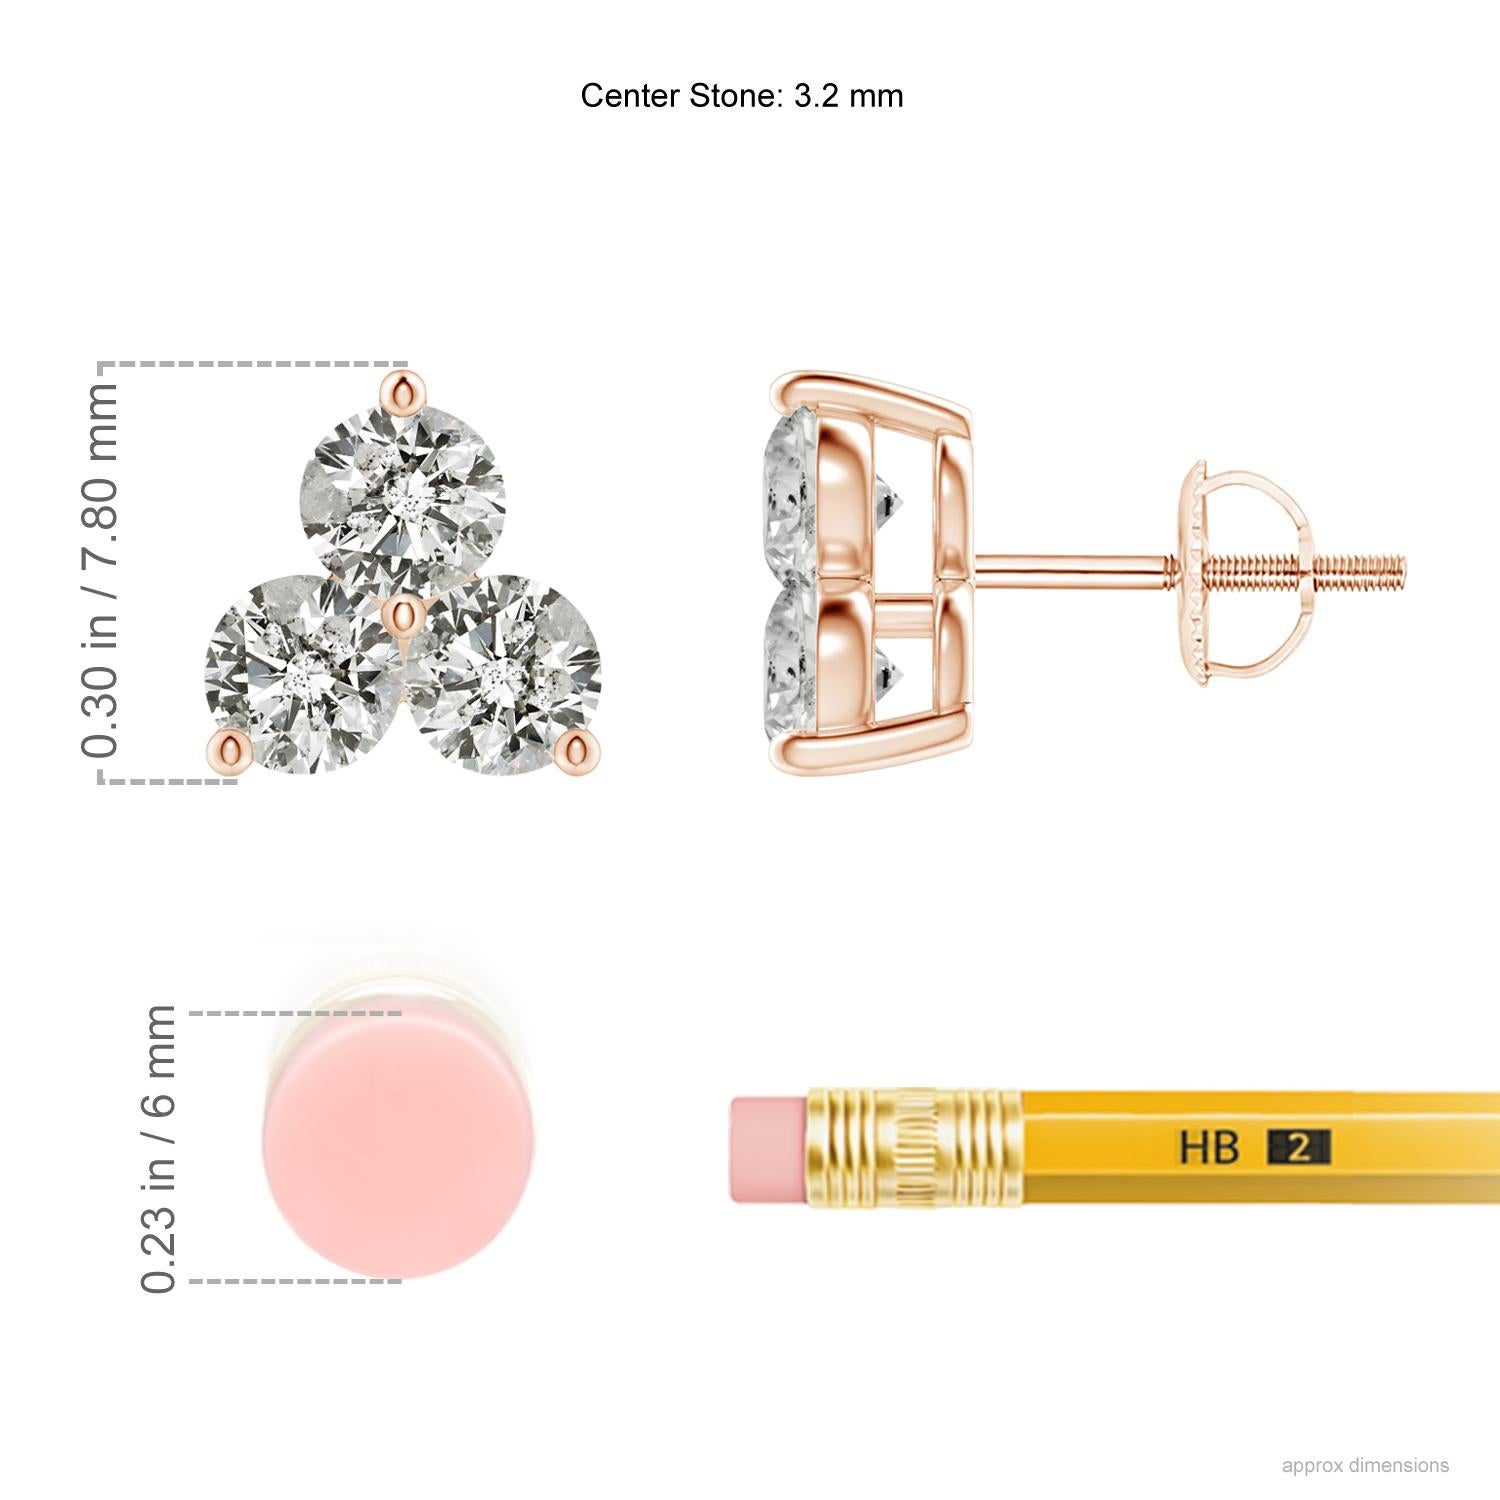 Trios of sparkling round diamonds are held in a shared prong setting to look like fascinating clusters on these stud earrings. Their glimmering white allure will enchant you and accentuate your look in a beautiful way. Crafted in 14K rose gold,